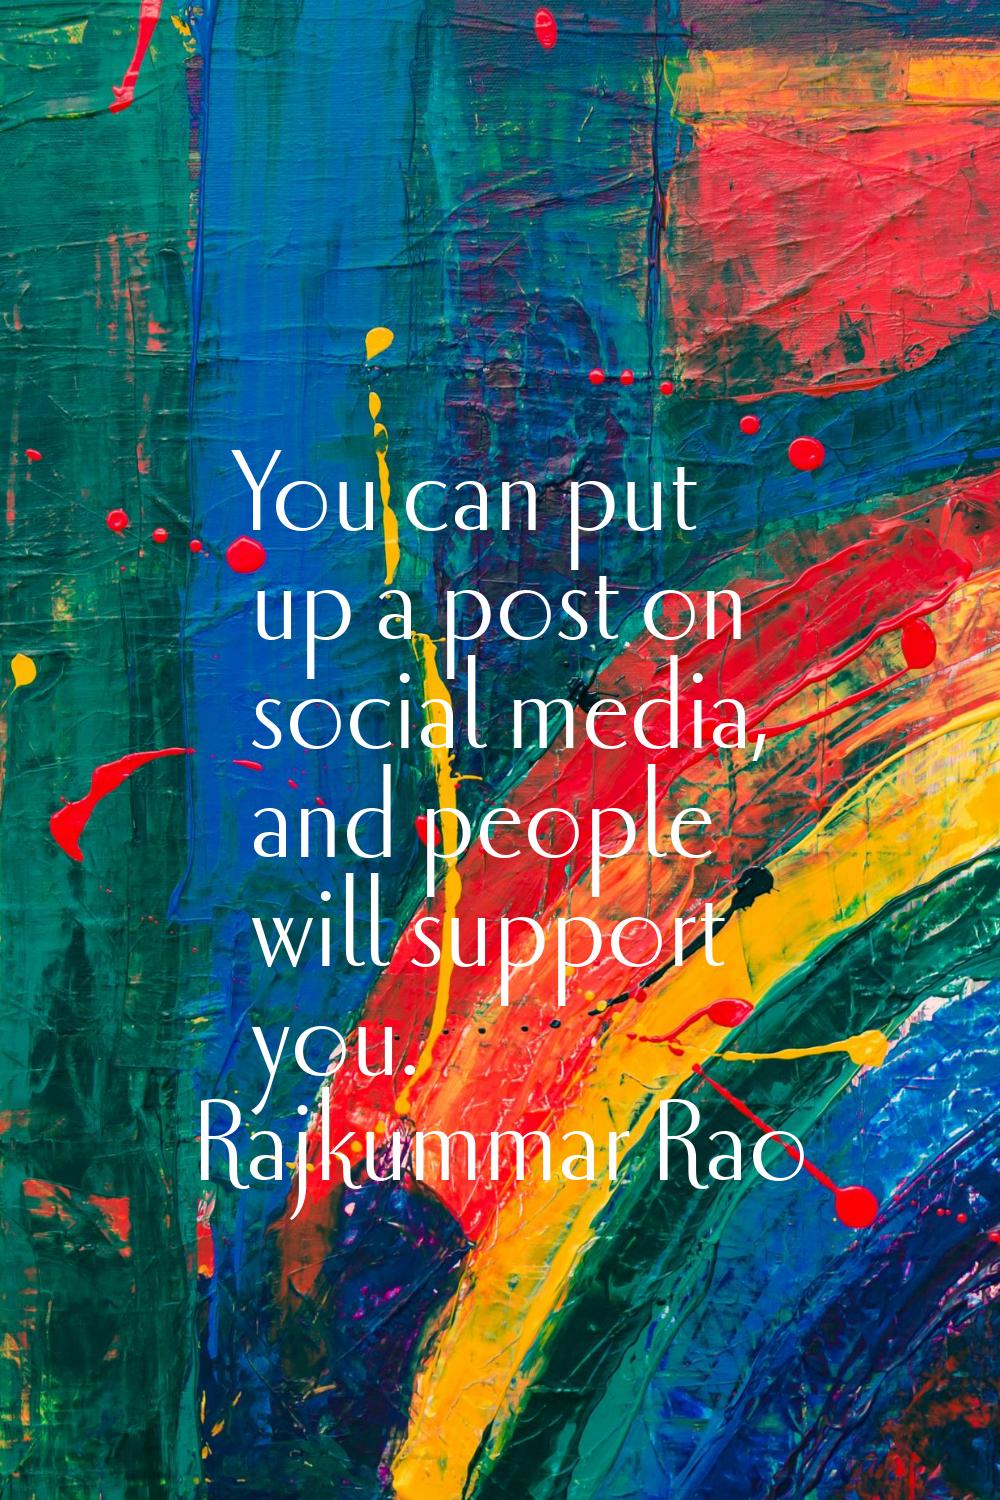 You can put up a post on social media, and people will support you.